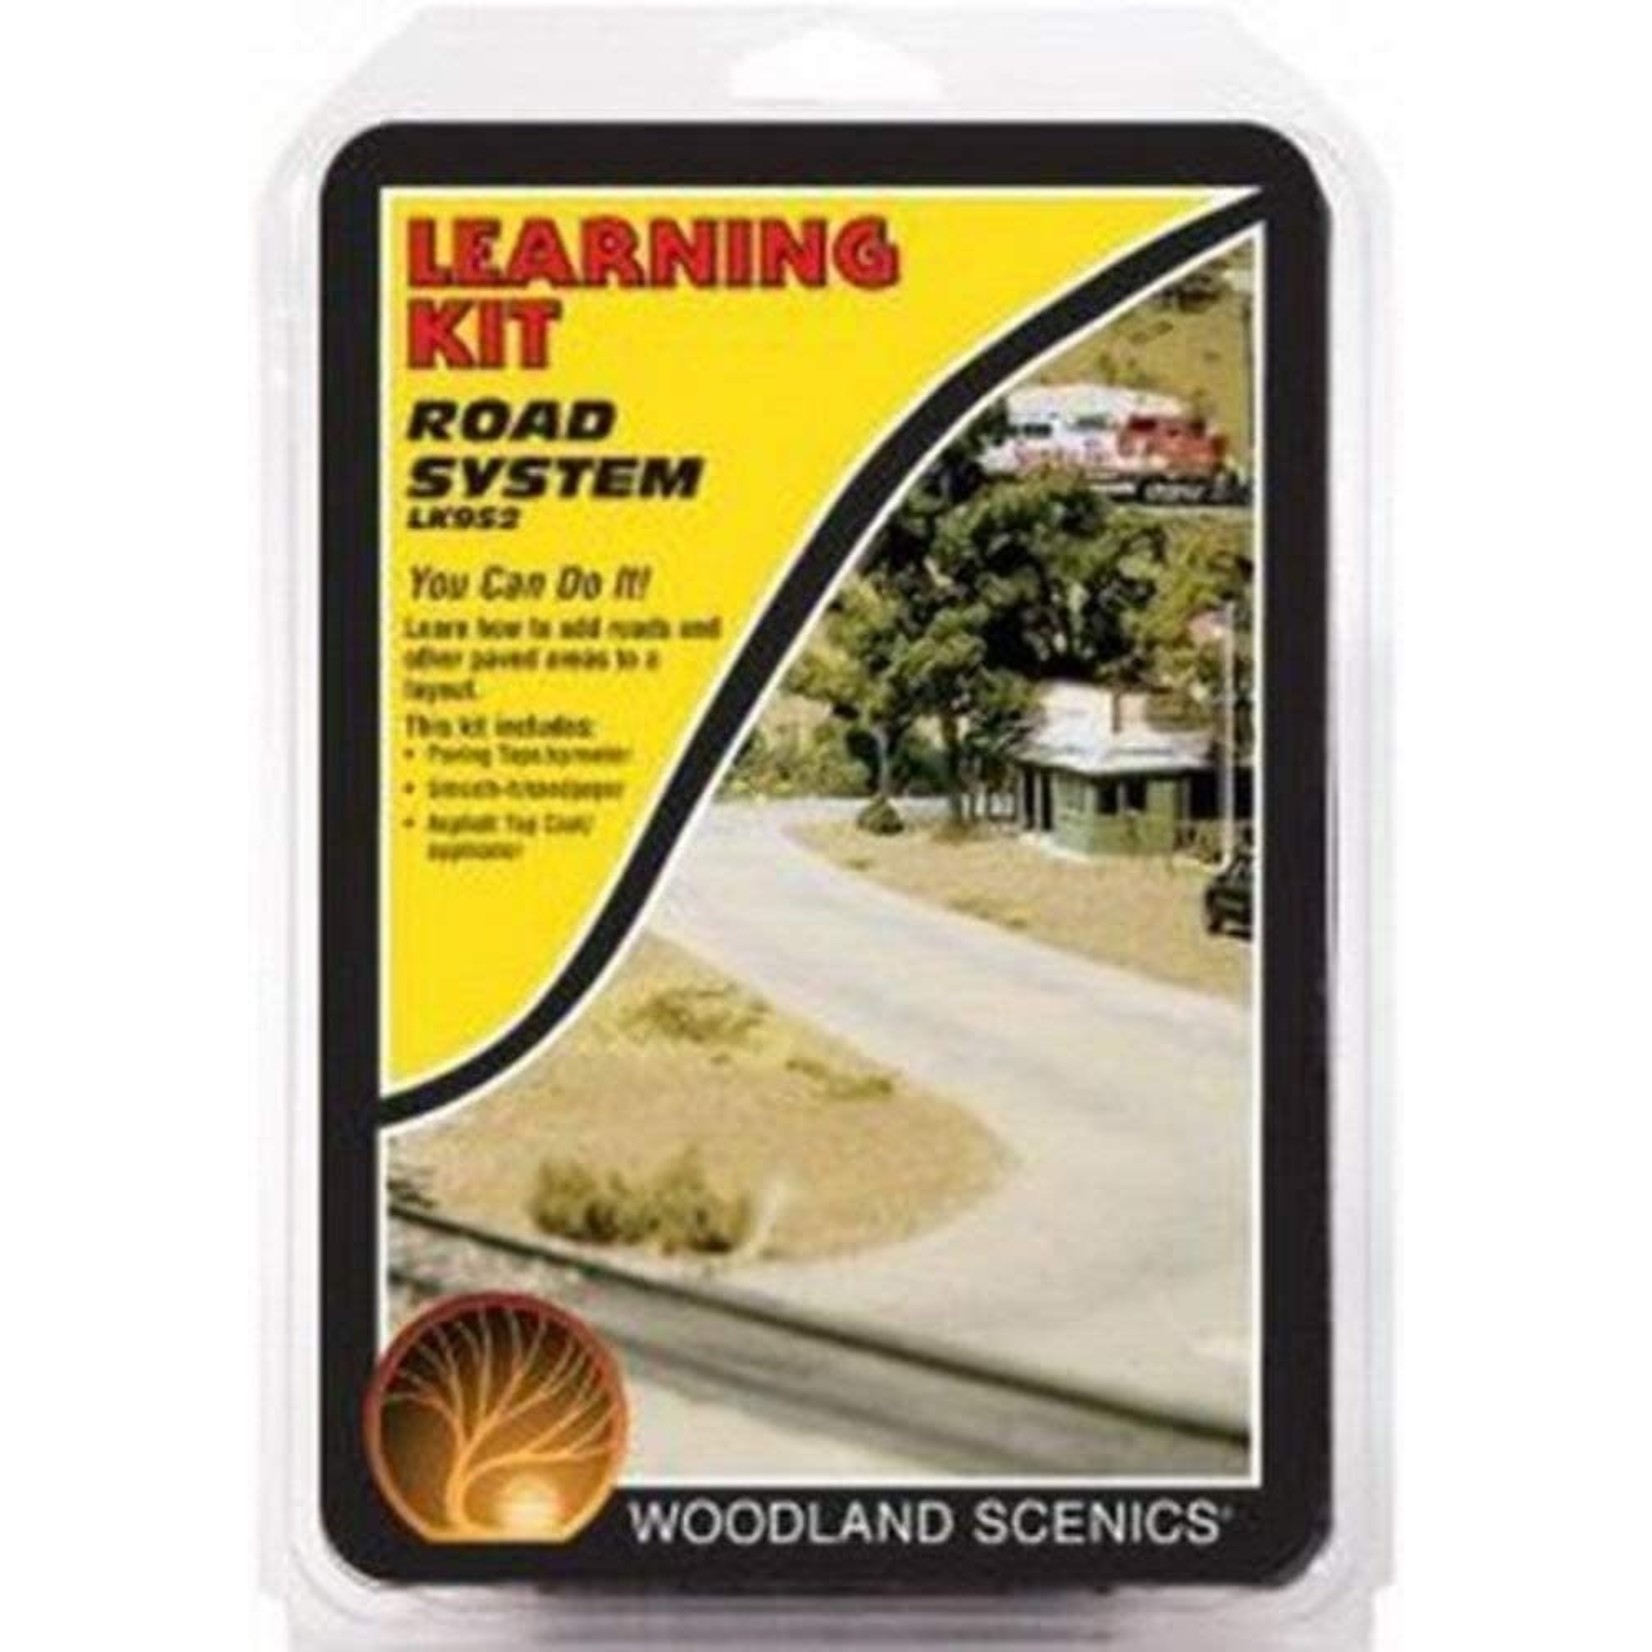 Learning Kit Road System